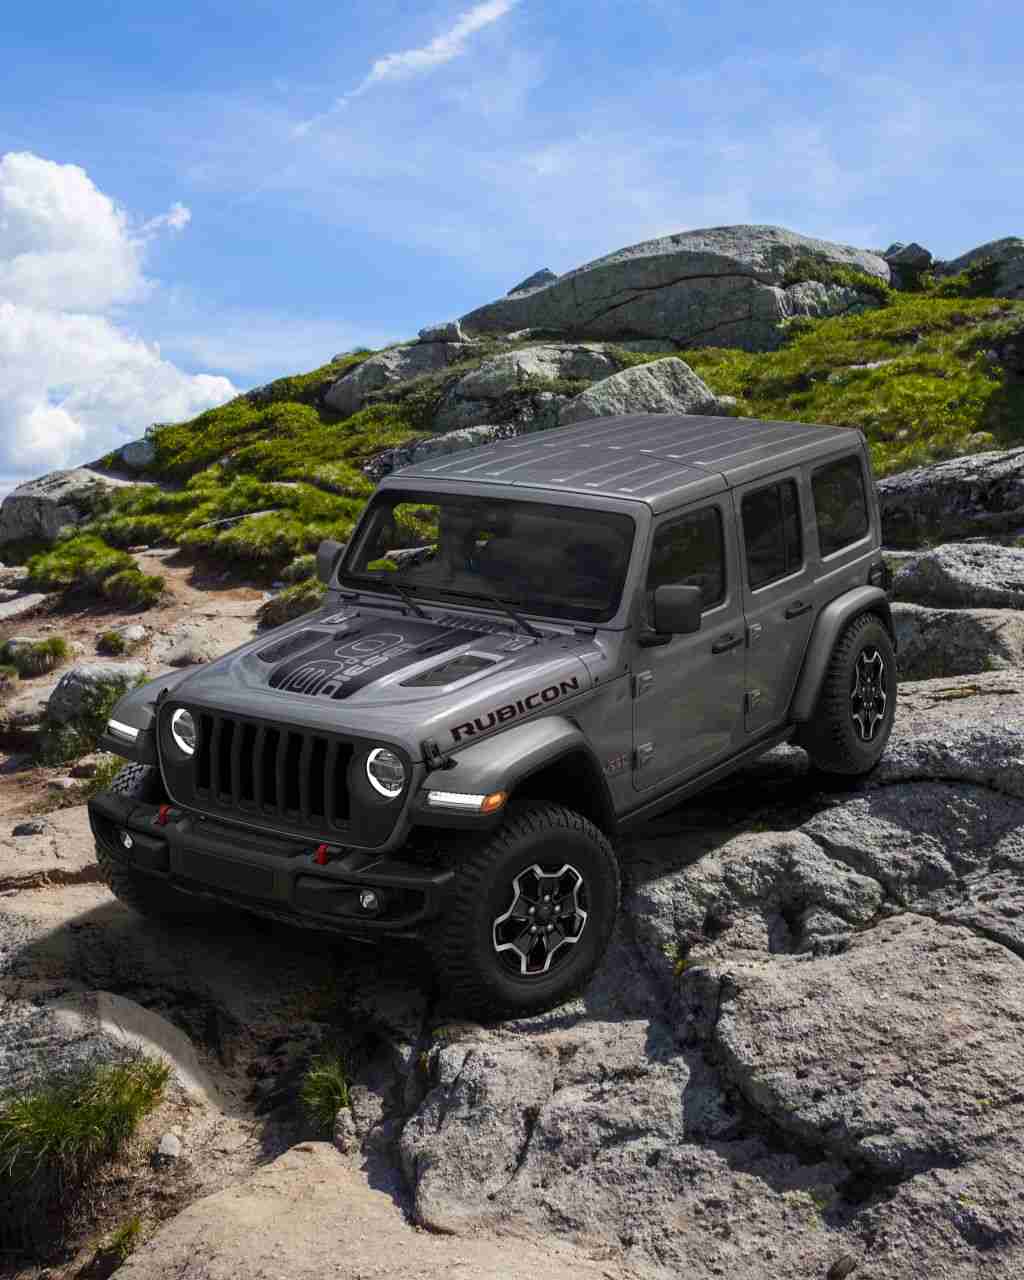 Exclusive Limited-Edition Wrangler Marks Final EcoDiesel Production